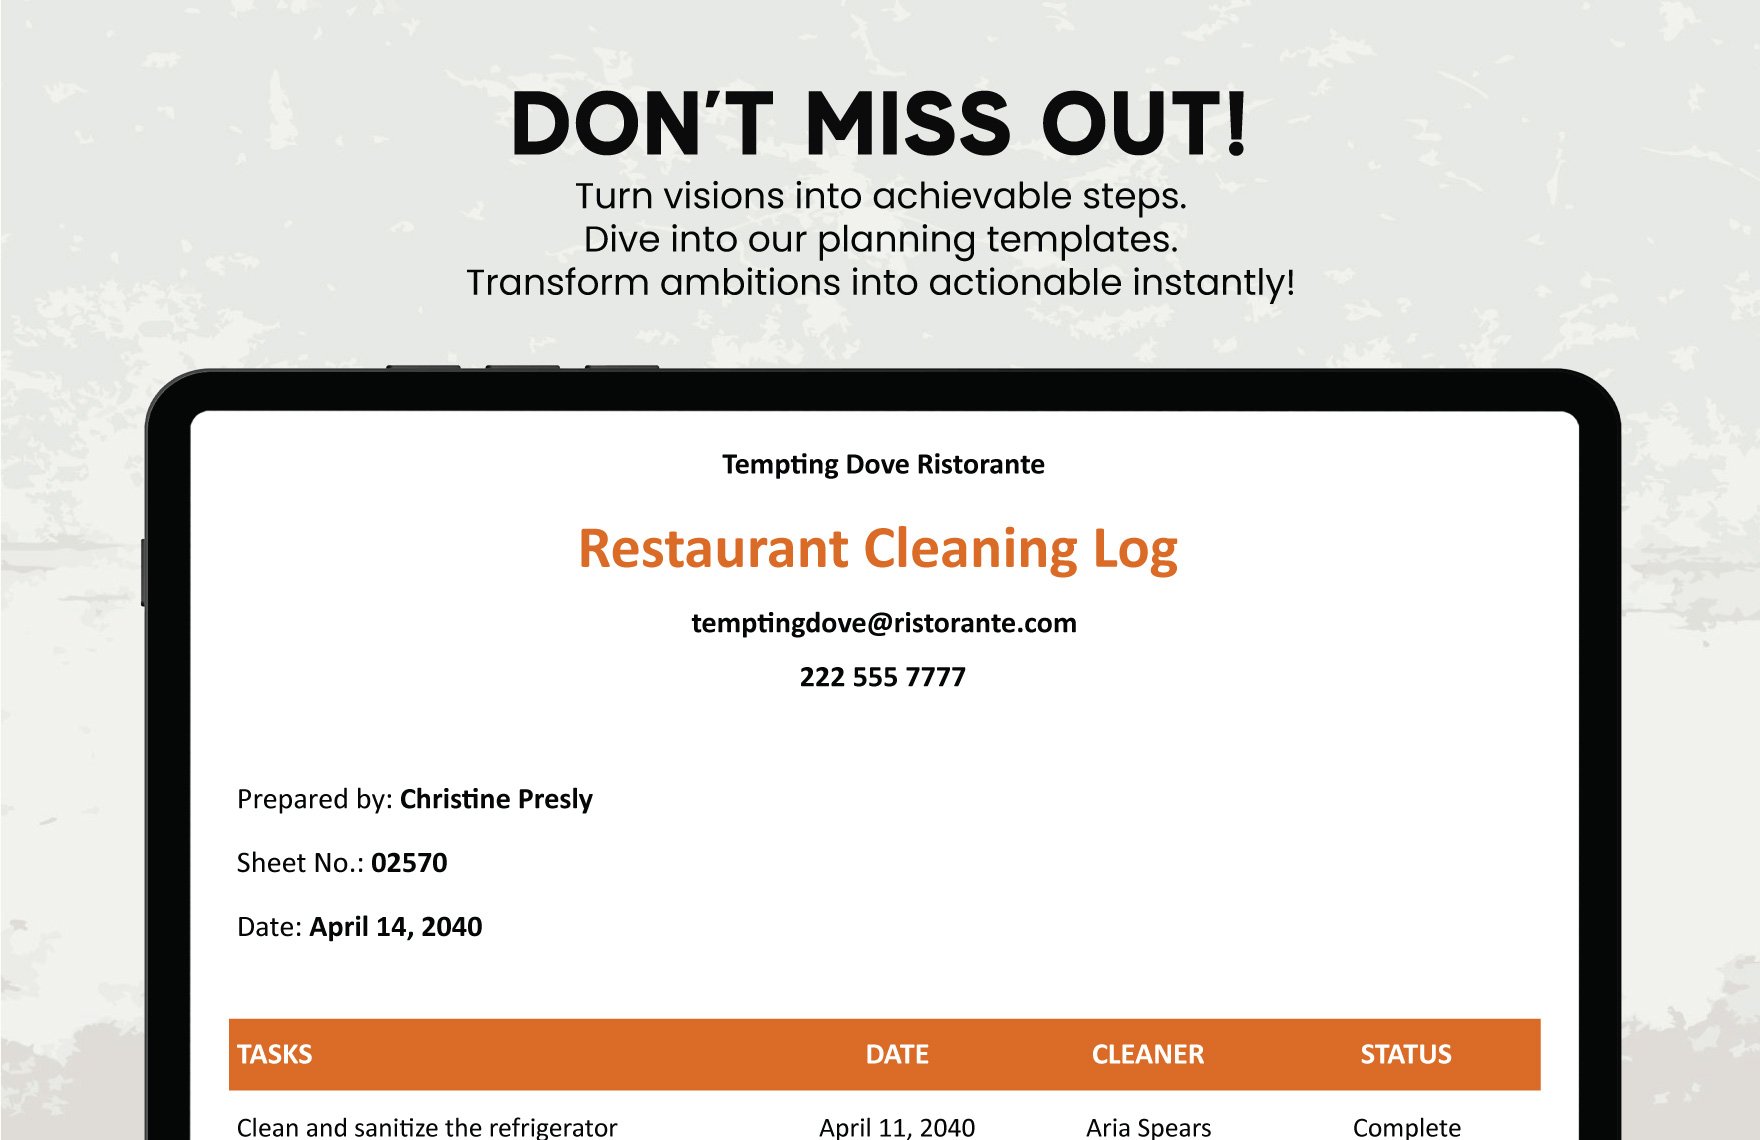 Restaurant Cleaning Log Template